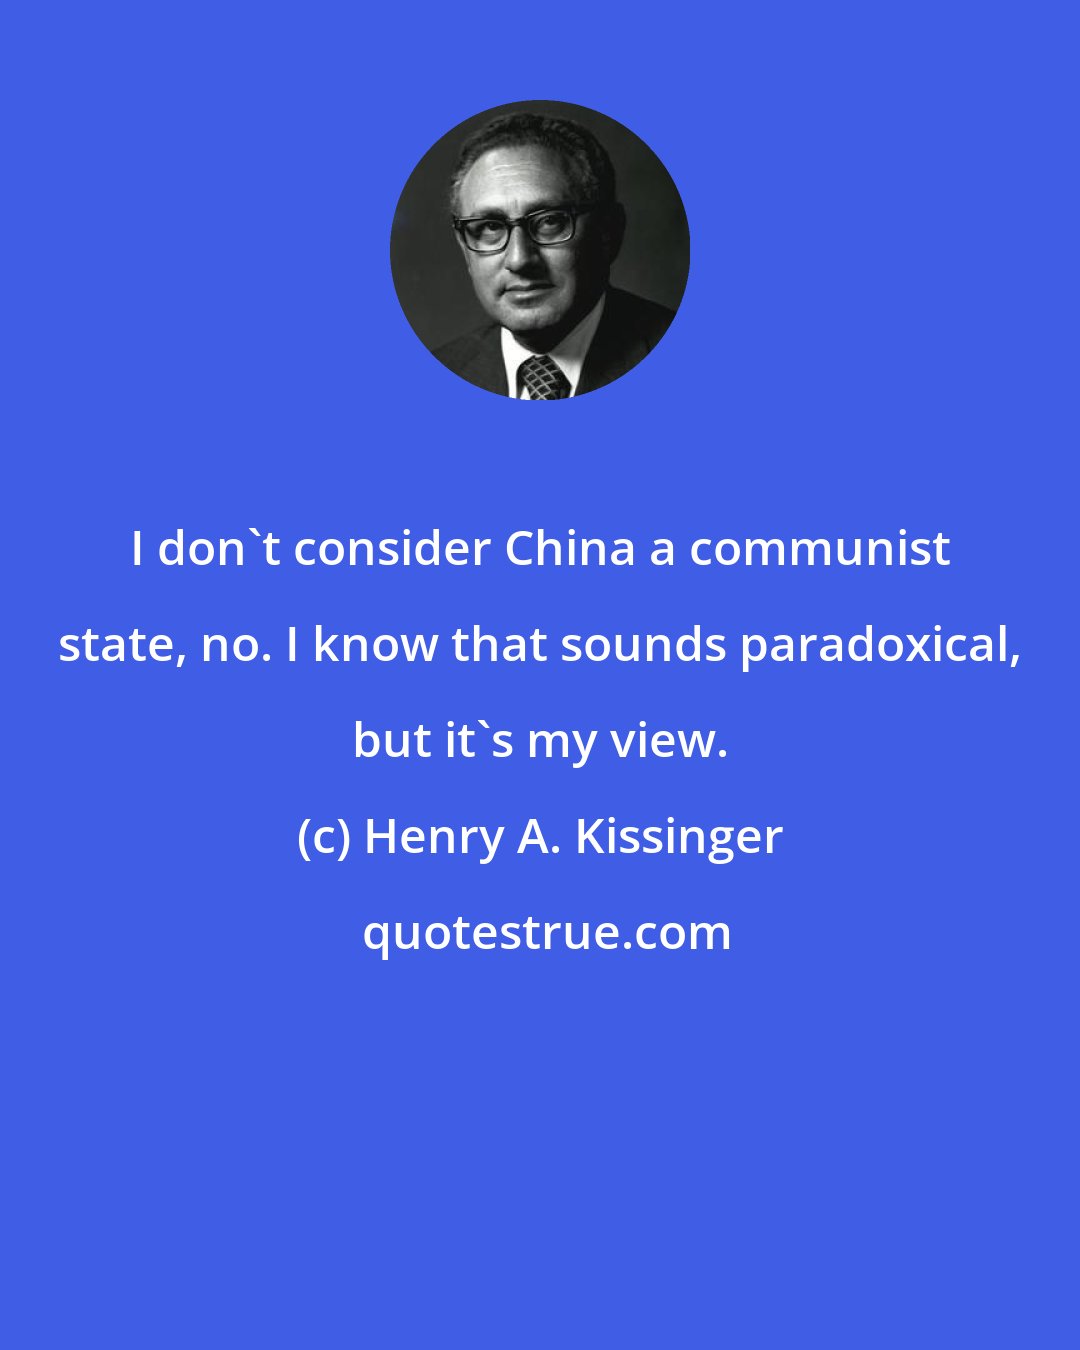 Henry A. Kissinger: I don't consider China a communist state, no. I know that sounds paradoxical, but it's my view.